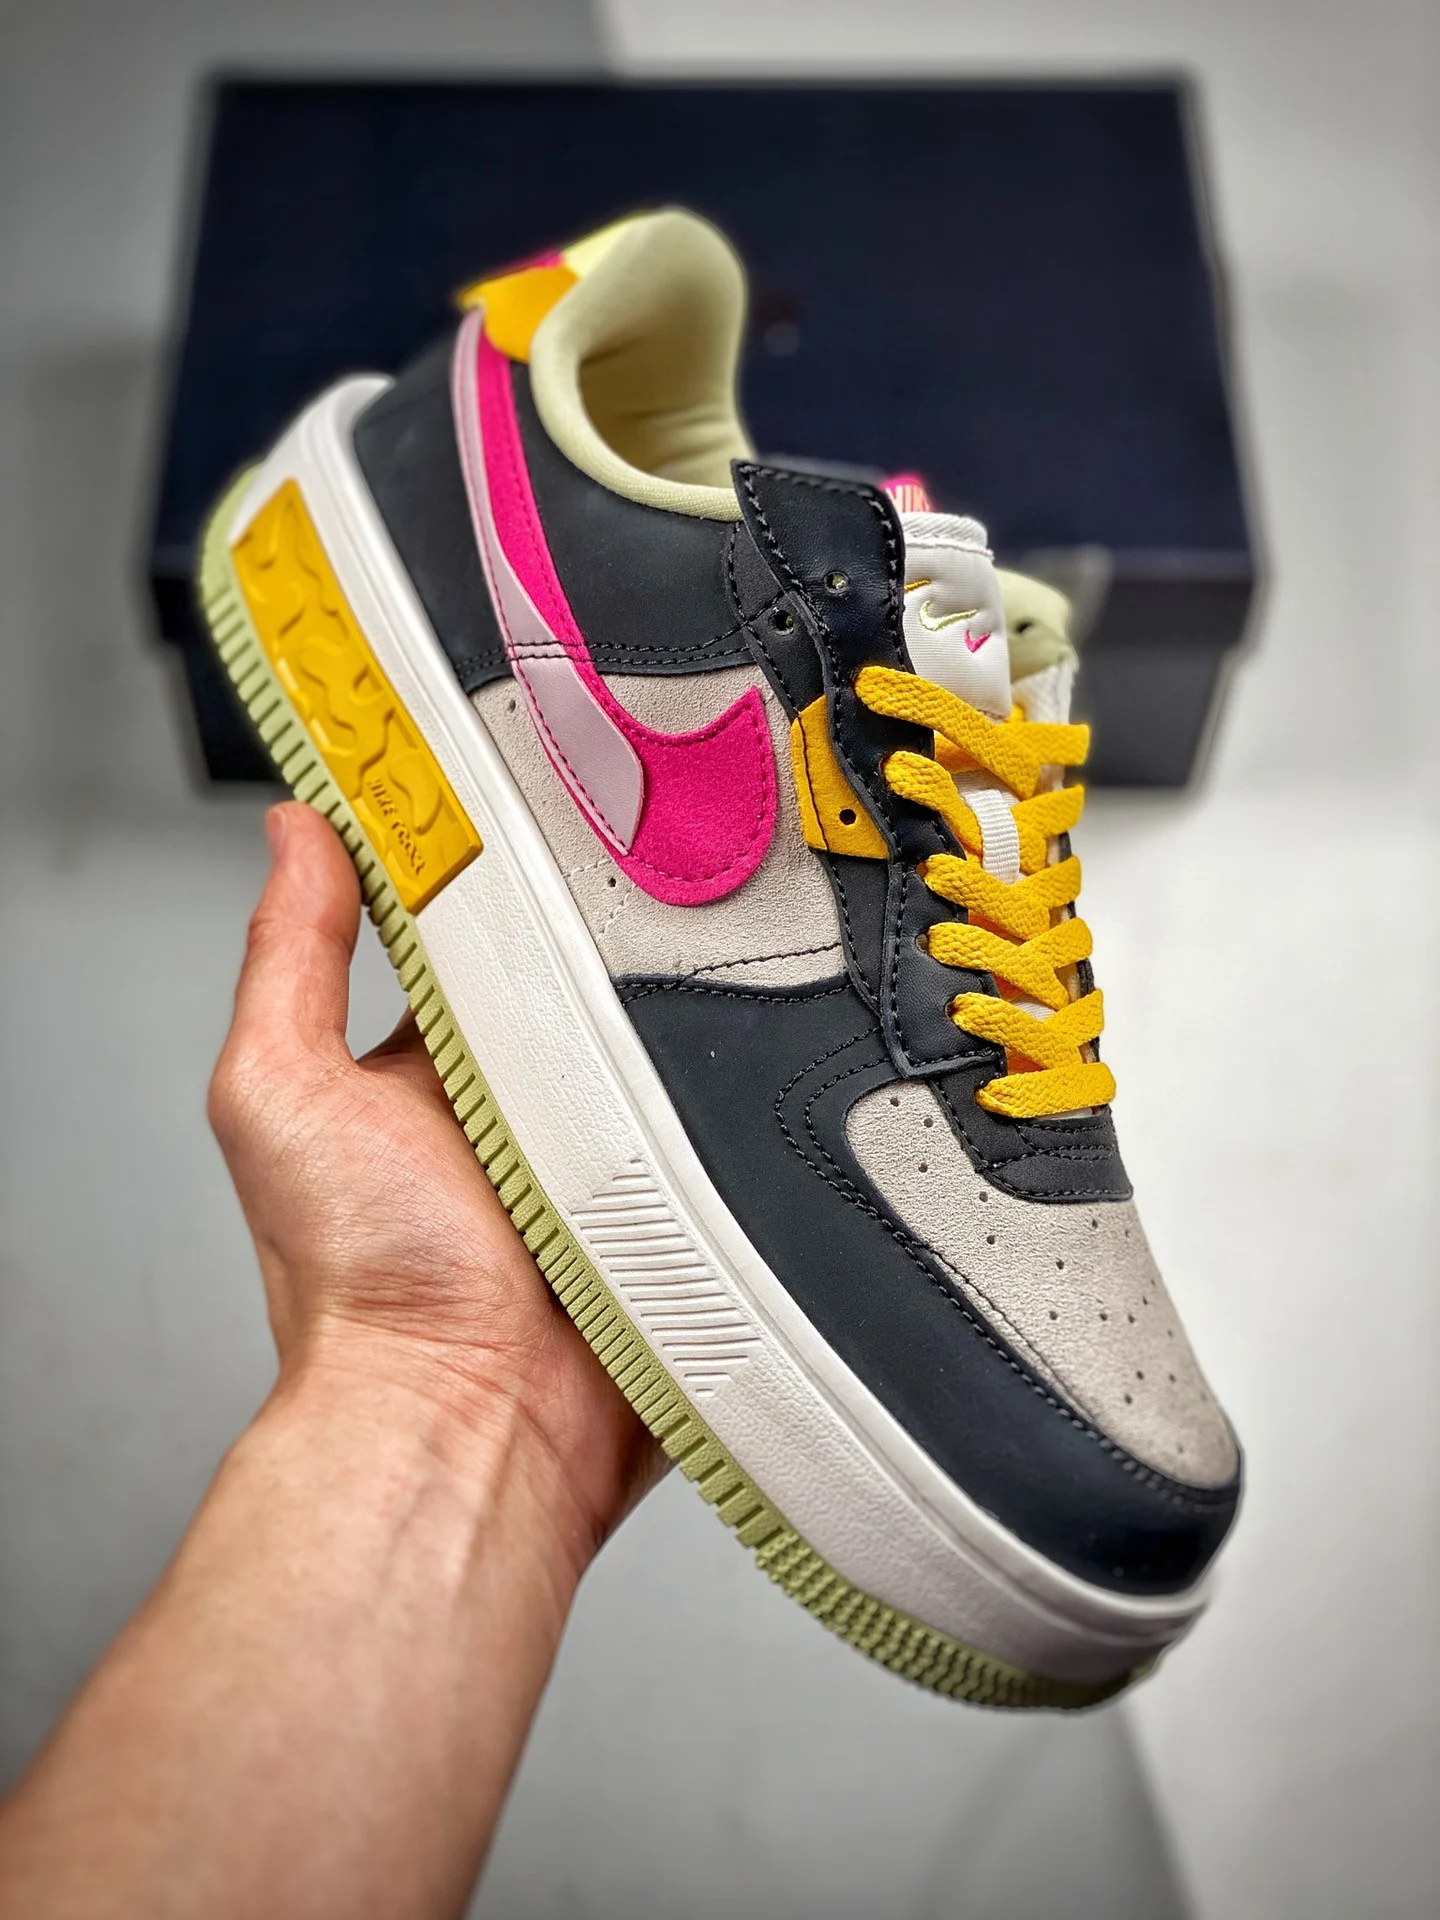 Nike Air Force 1 Fontanka Off Noir Pink Prime-Summit White DR7880-001 For Sale